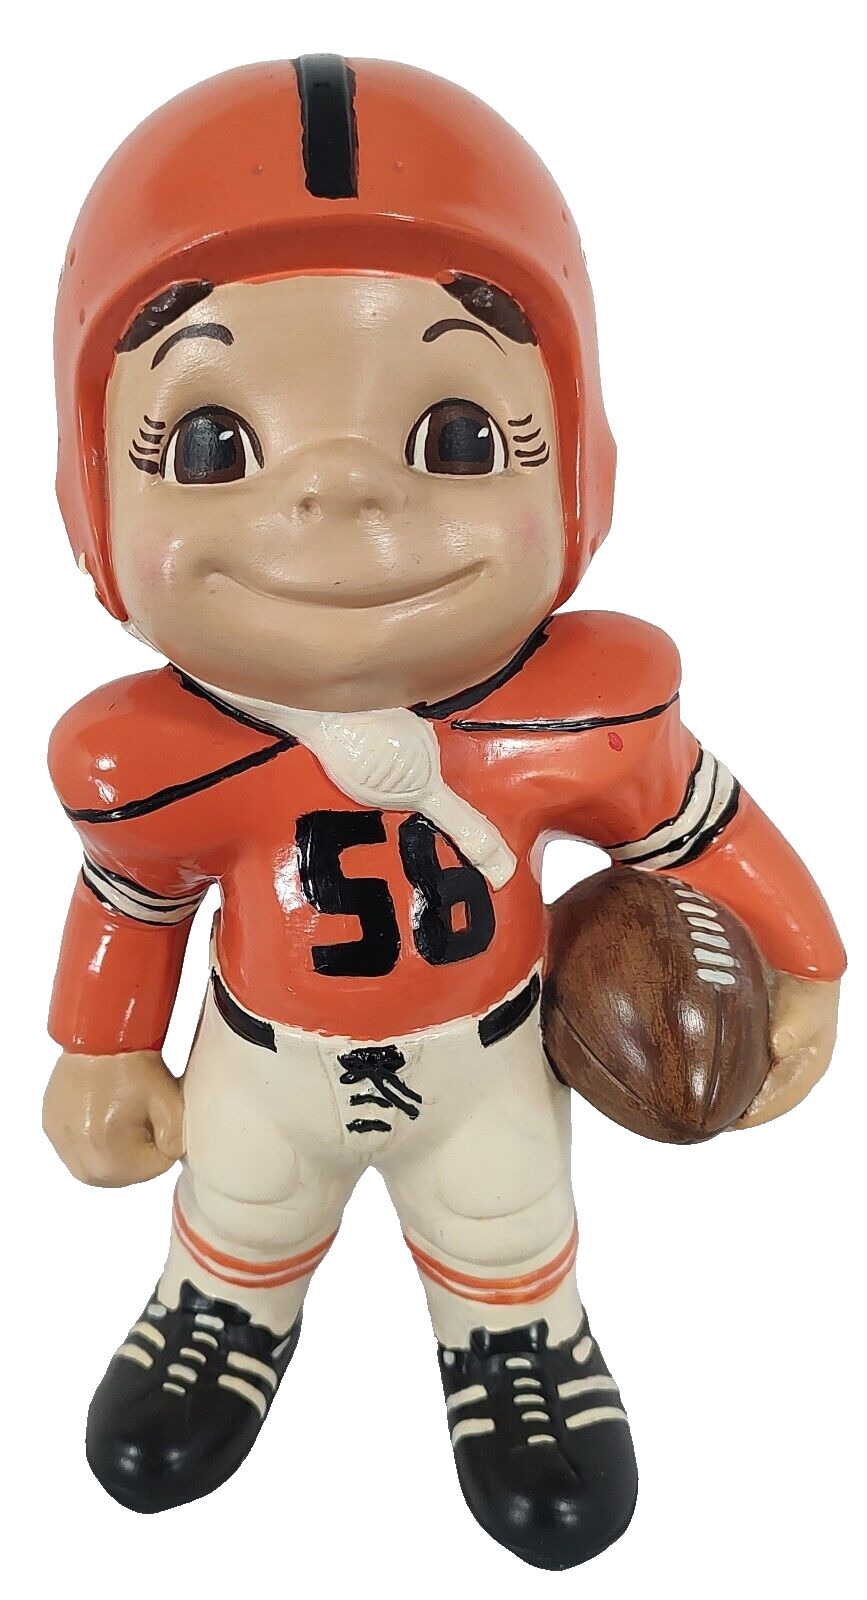 Vintage 1970s Atlantic Mold Smiley Ceramic Figure Football Player 11 Inches